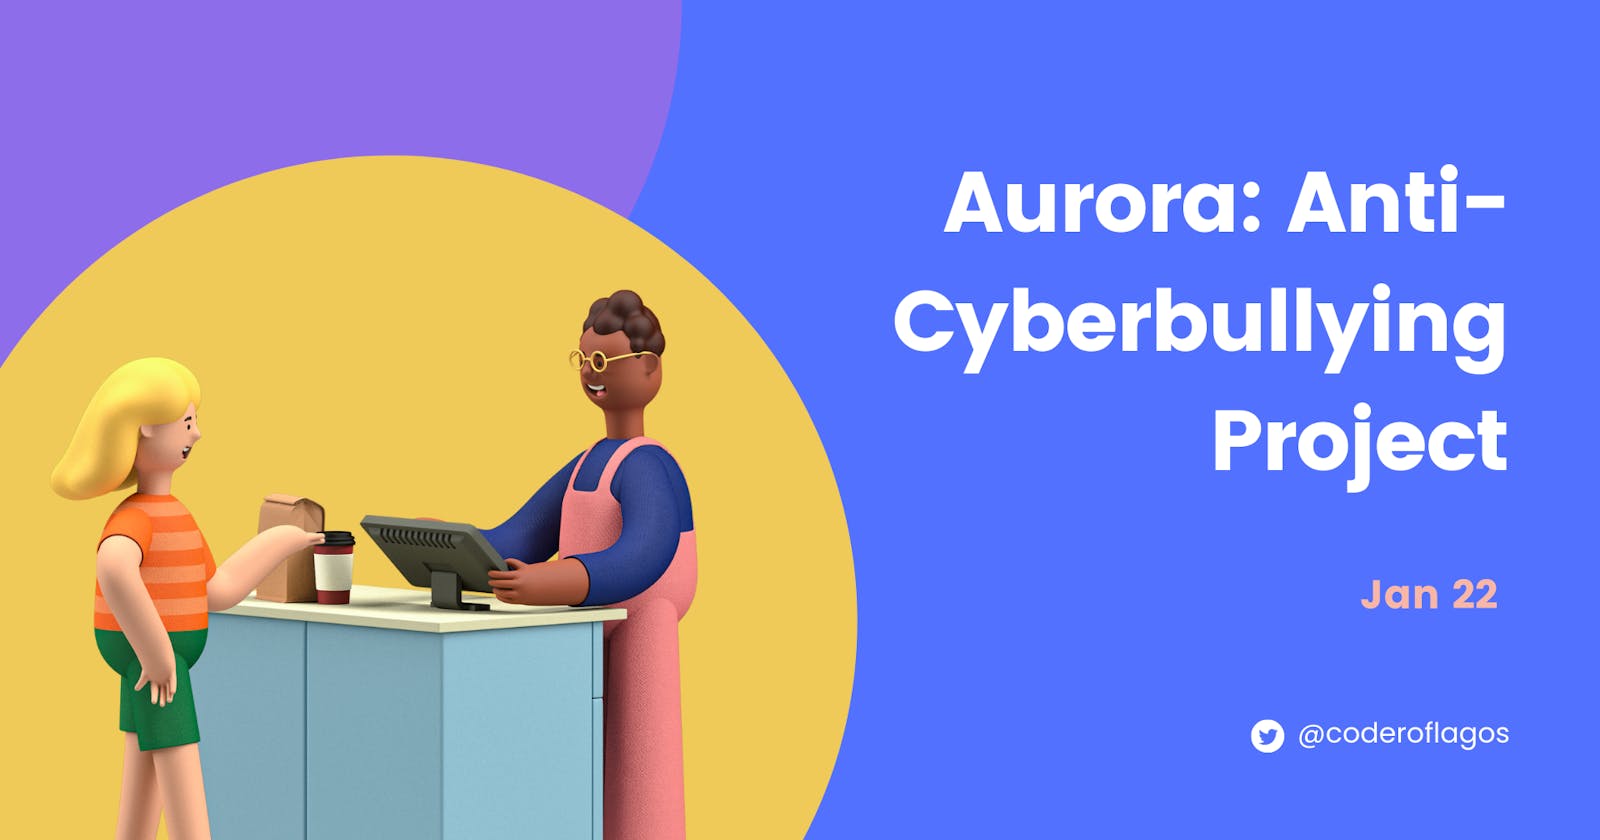 Aurora: An application that helps fight cyberbullying.